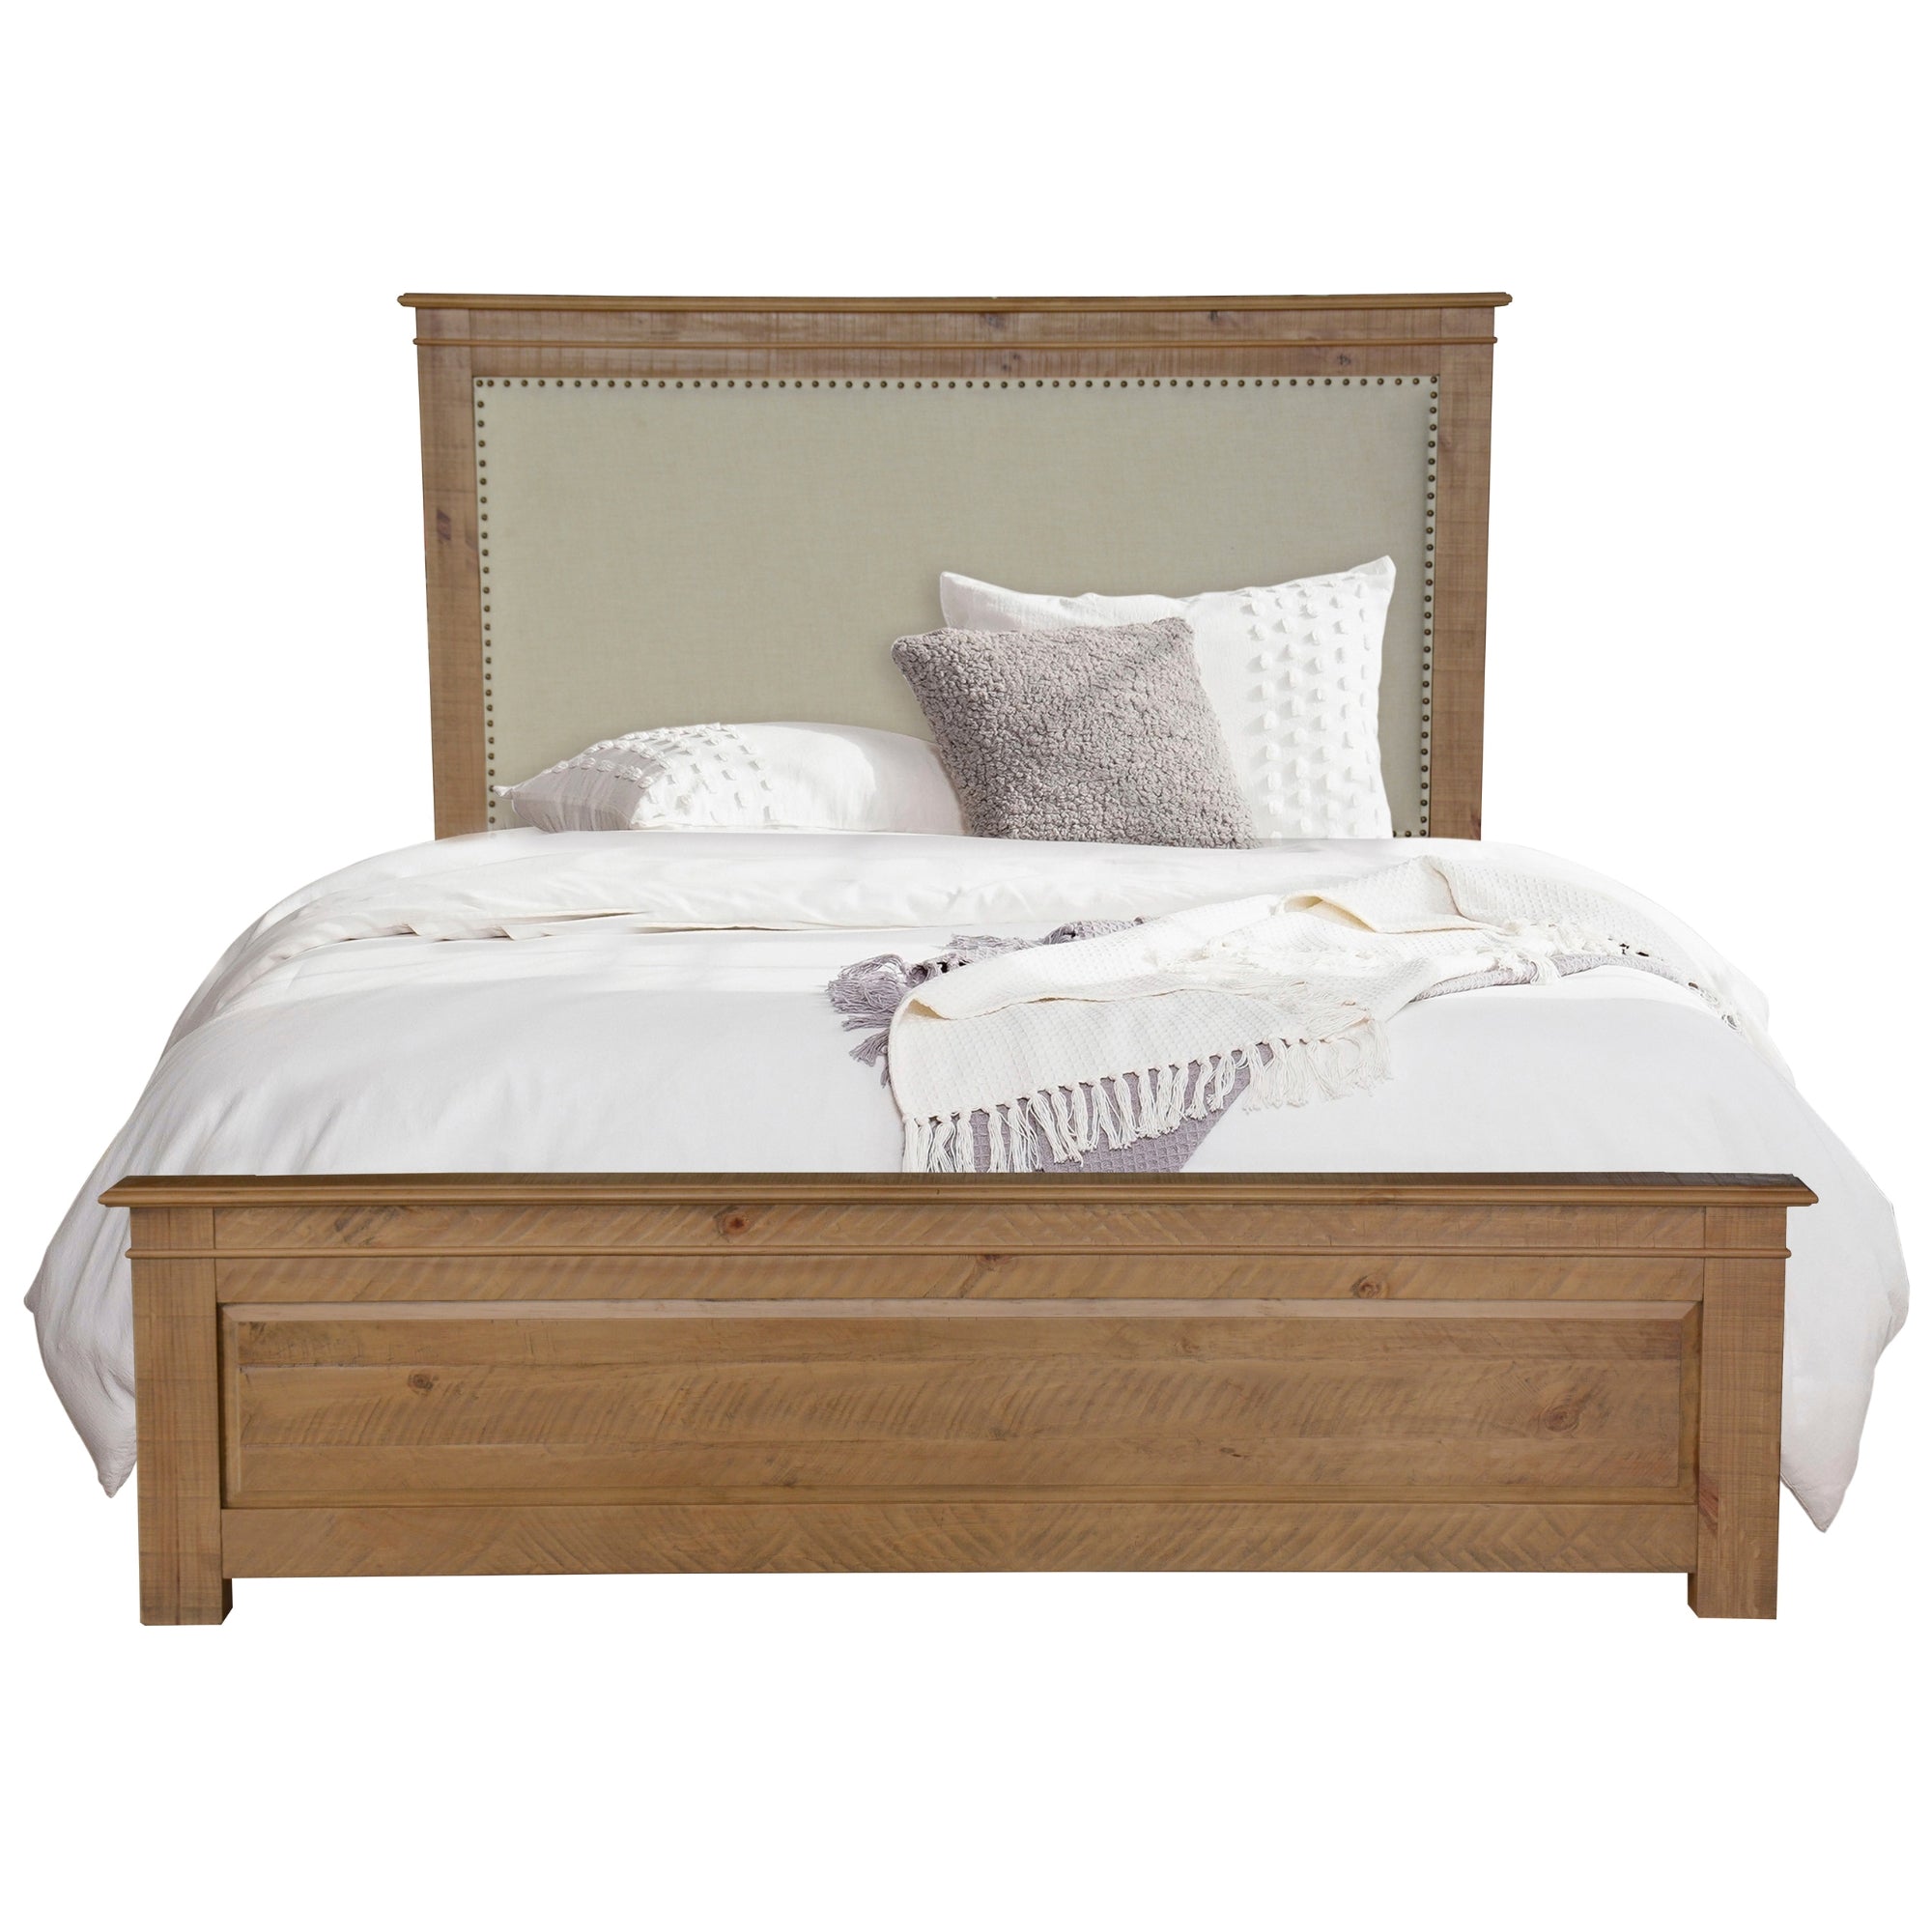 Rustic Pine King Bed Suite 5pc Upholstered Headboard Felt Drawers